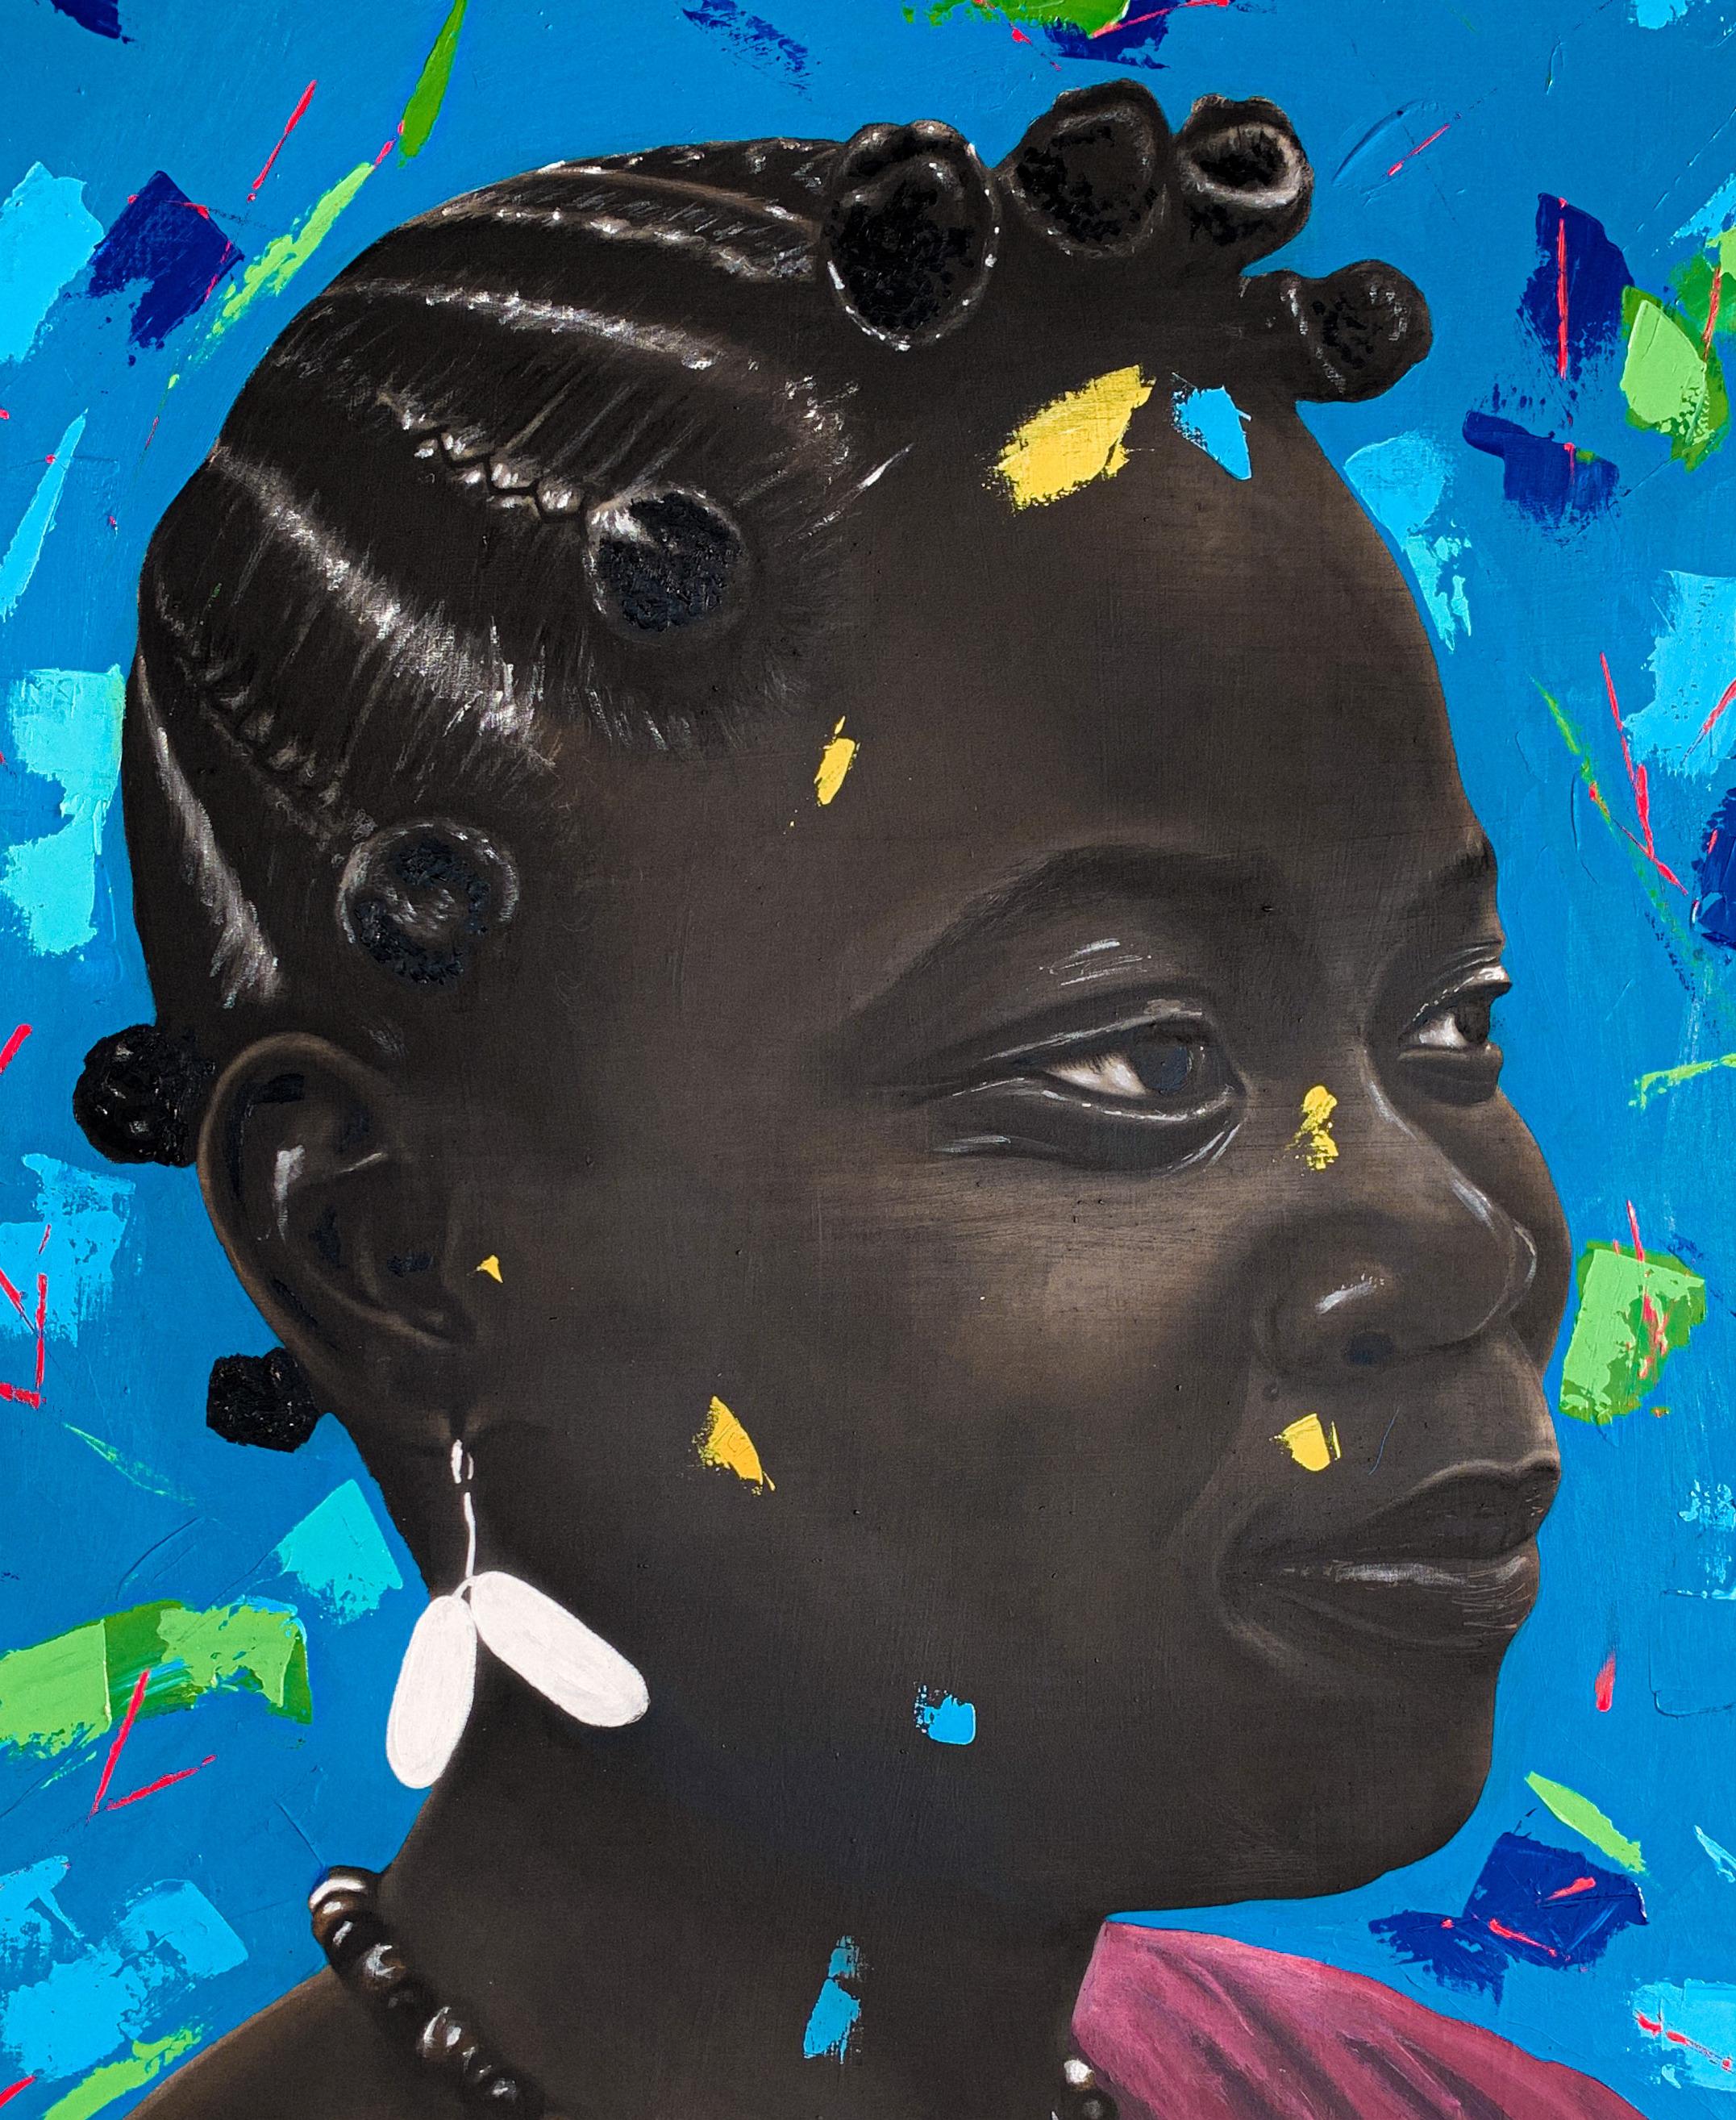 Atoke Oni koroba is the true beauty in a black culture that rests not only in its great artistic history but in the natural values which our African women keep maintaining the African heritage.
This art shows a lot of values from the dark shinning